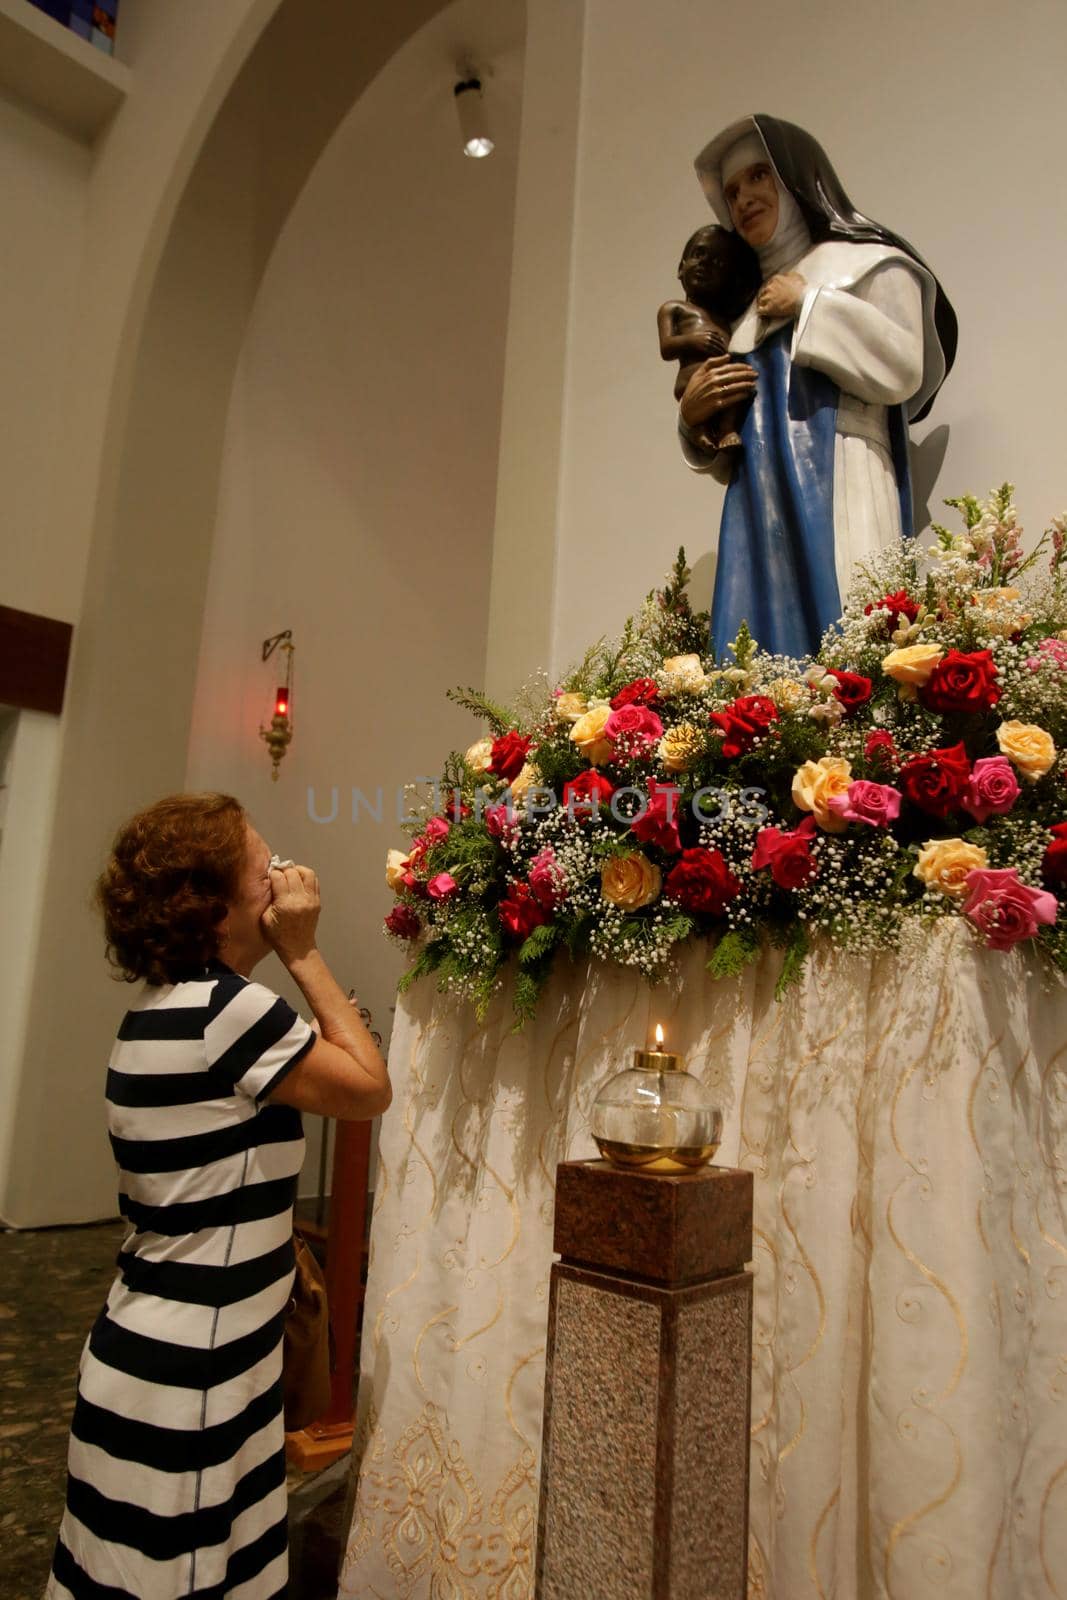 salvador, bahia, brazil - october 13, 2019: return of the nun Santa Dulce dos Pobres seen with the sculpture of the saint in the sanctuary in the city of Salvador.